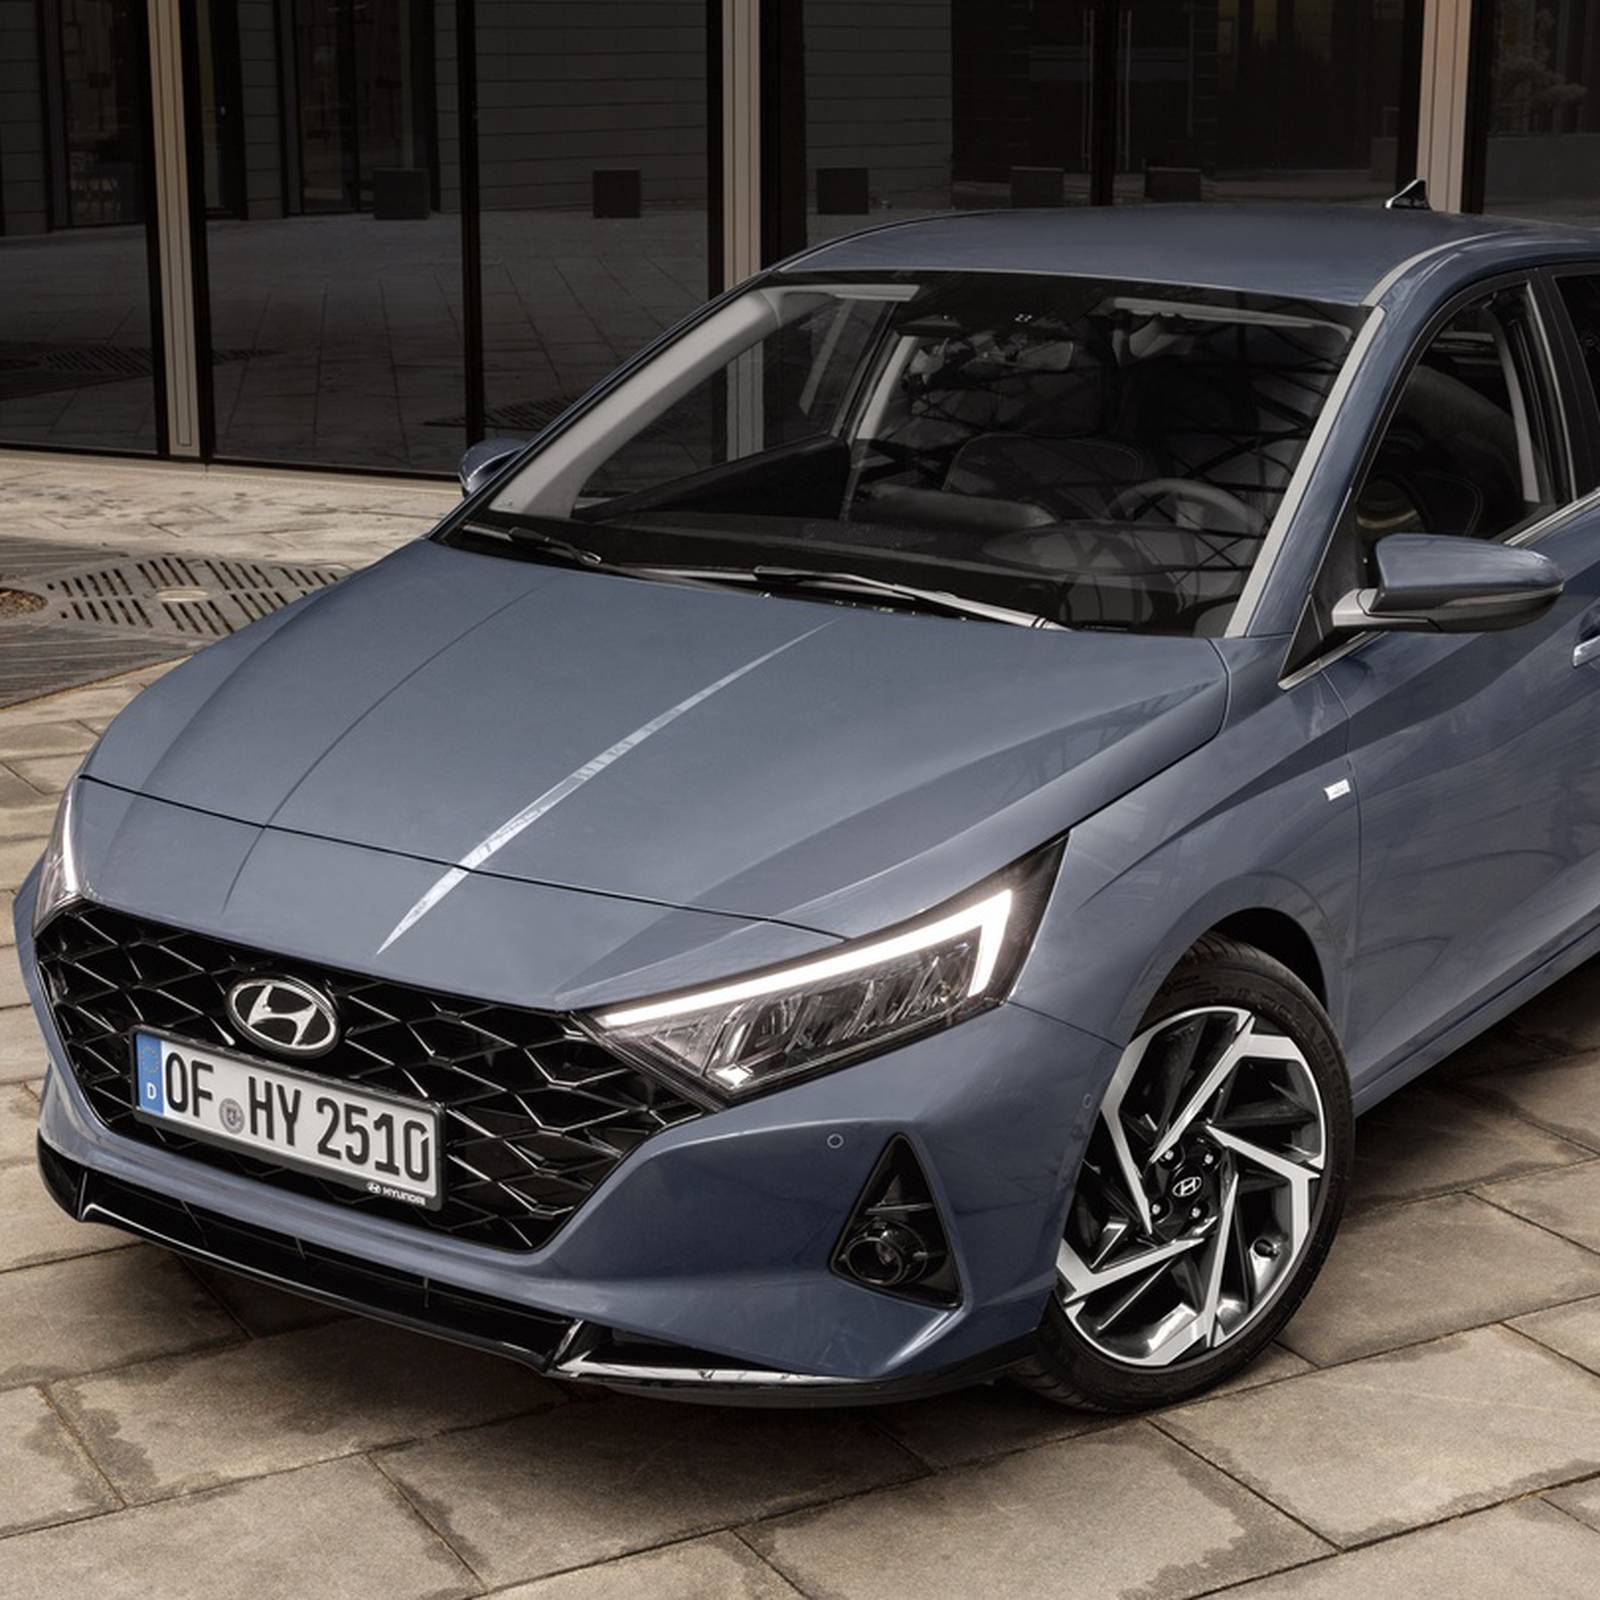 Hyundai i20: Korean overtakes some of its rivals in the supermini